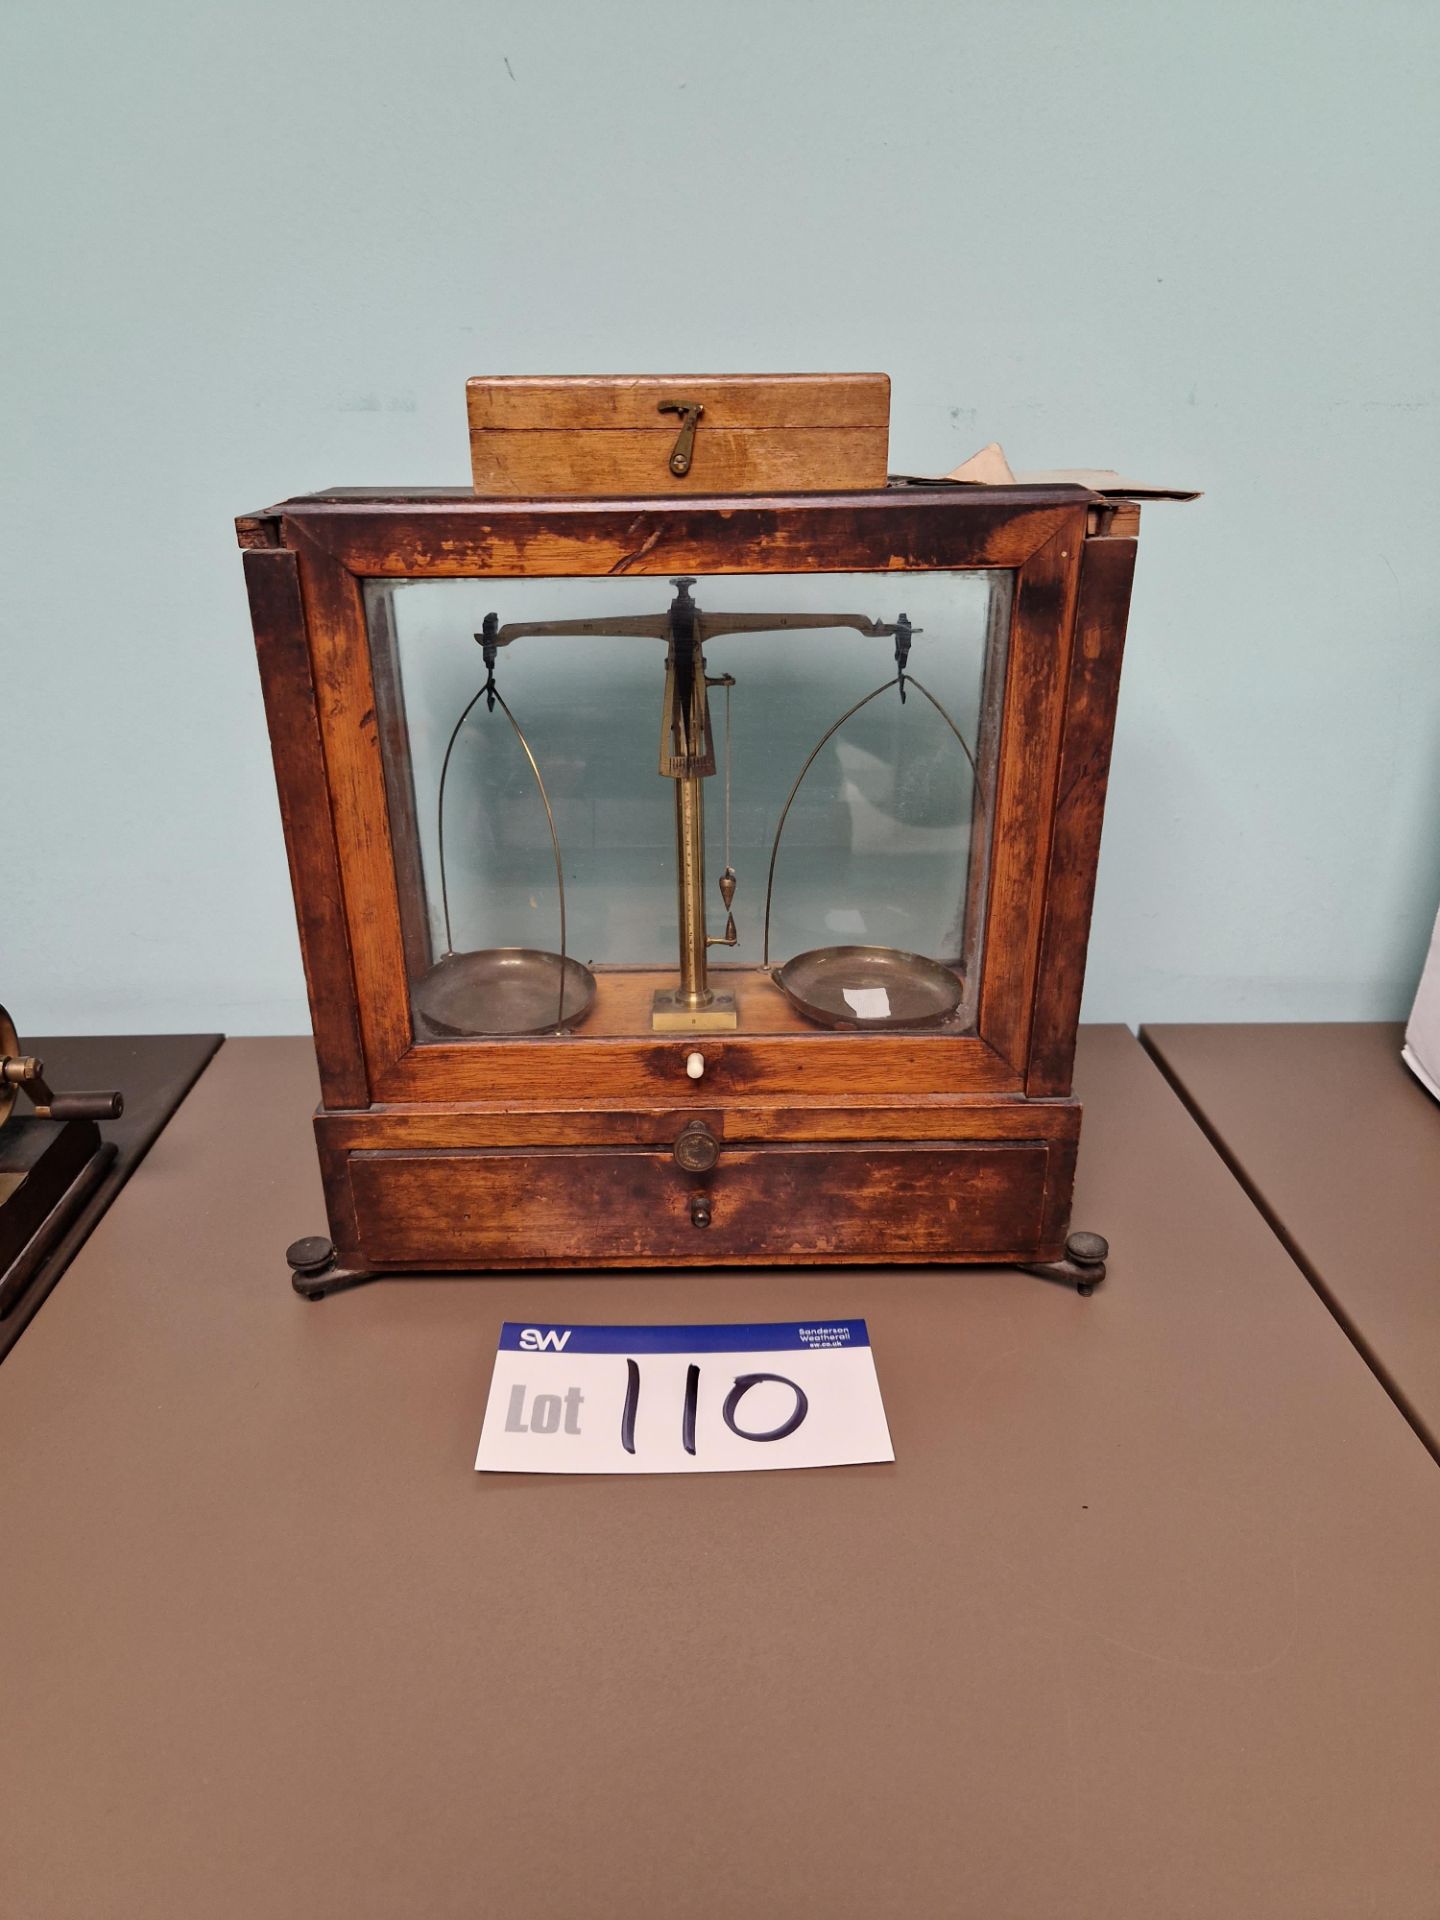 Set of Vintage Scales in Glazed Cabinet with Weights Please read the following important